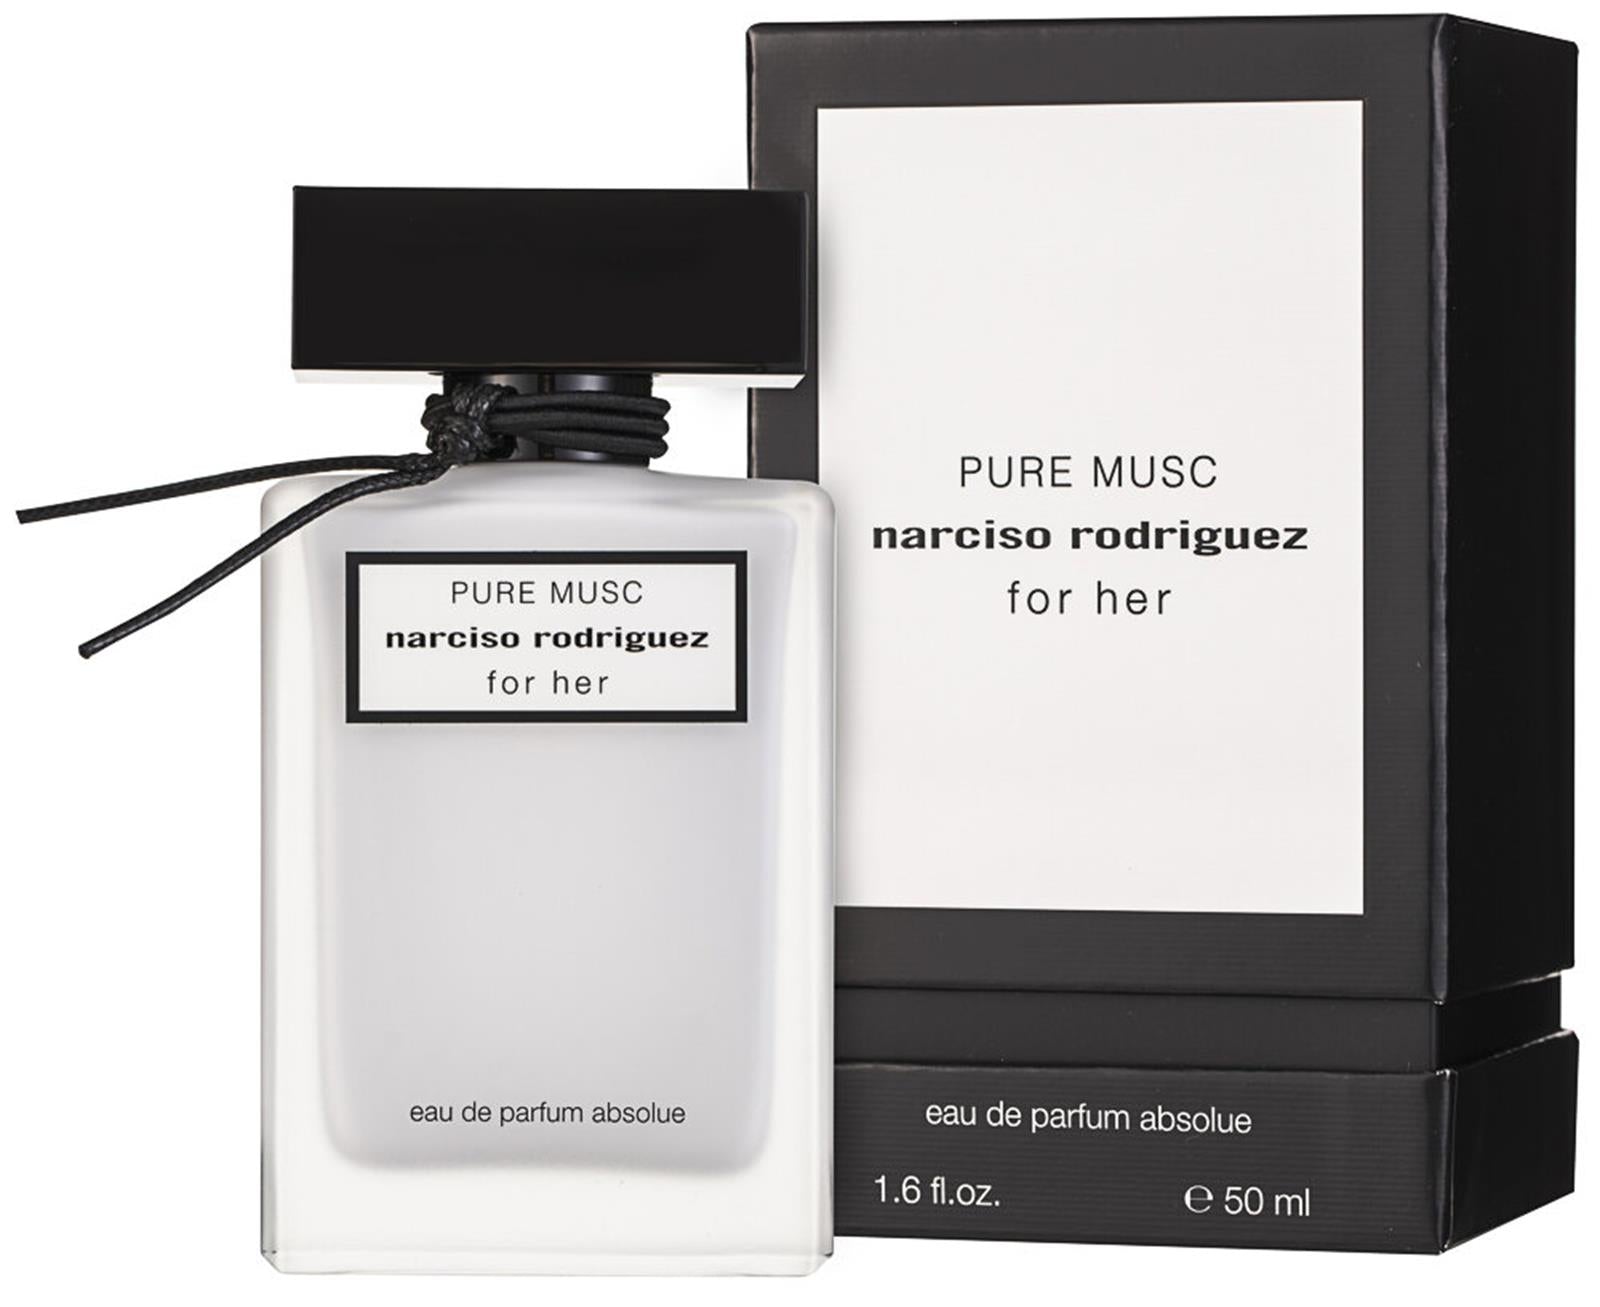 All of me narciso rodriguez. Narciso Rodriguez for her Musk. EDP Narciso Rodriguez Pure Musc for her 50 ml. Narciso Rodriguez Pure Musc,100 мл. Pure Musk Narciso Rodriguez for her.